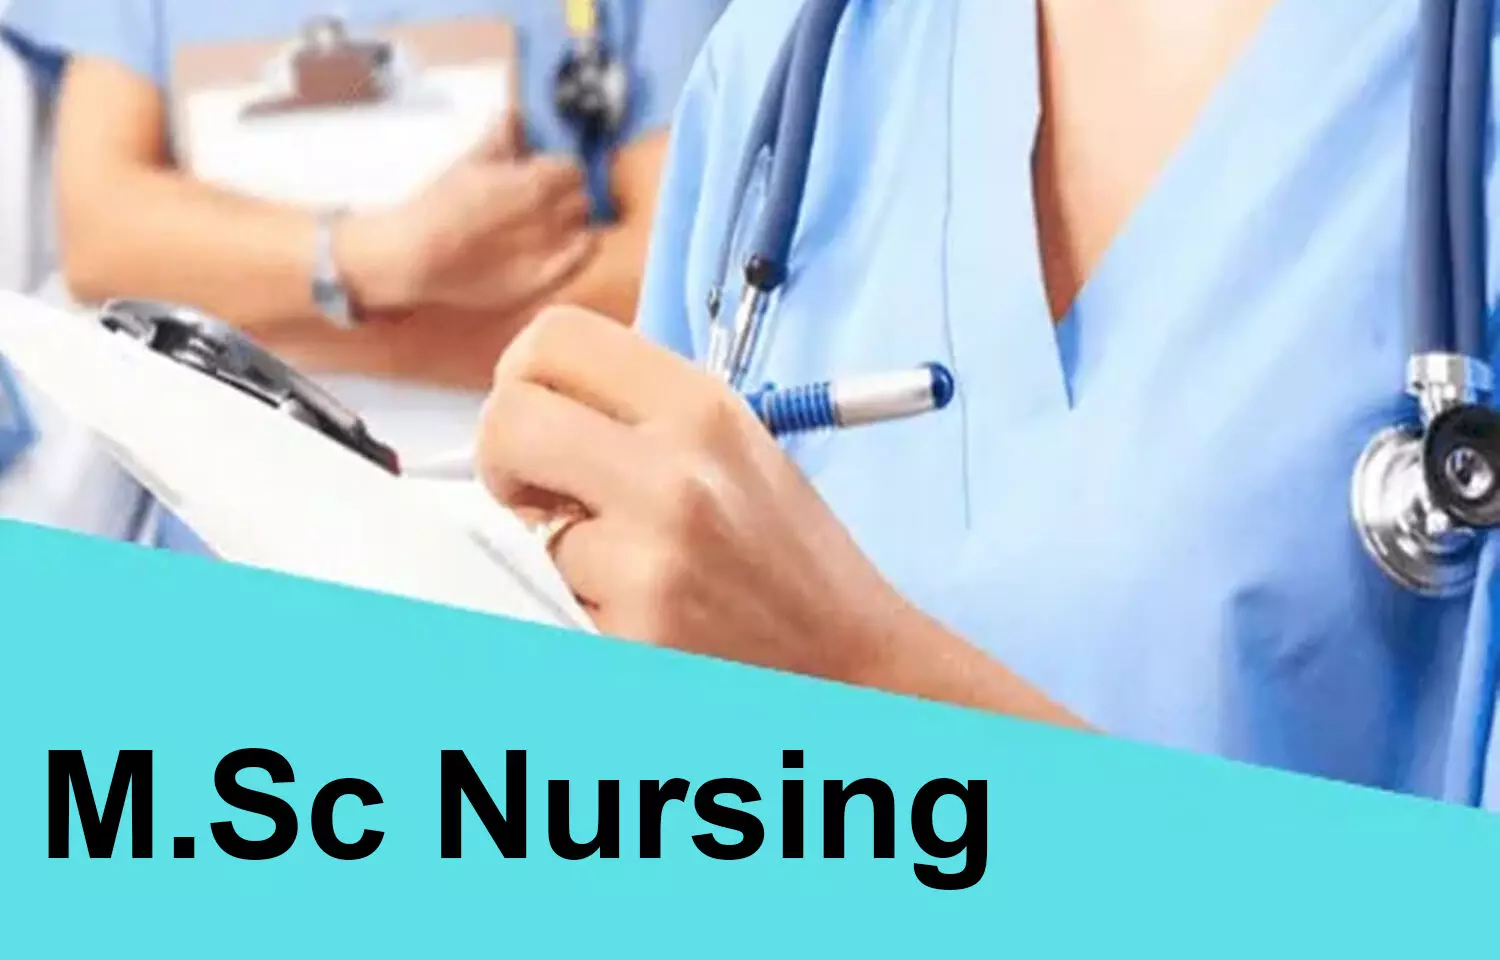 Dr NTR University of Health Sciences publishes timetable of MSc Nursing Ist, IInd year exams